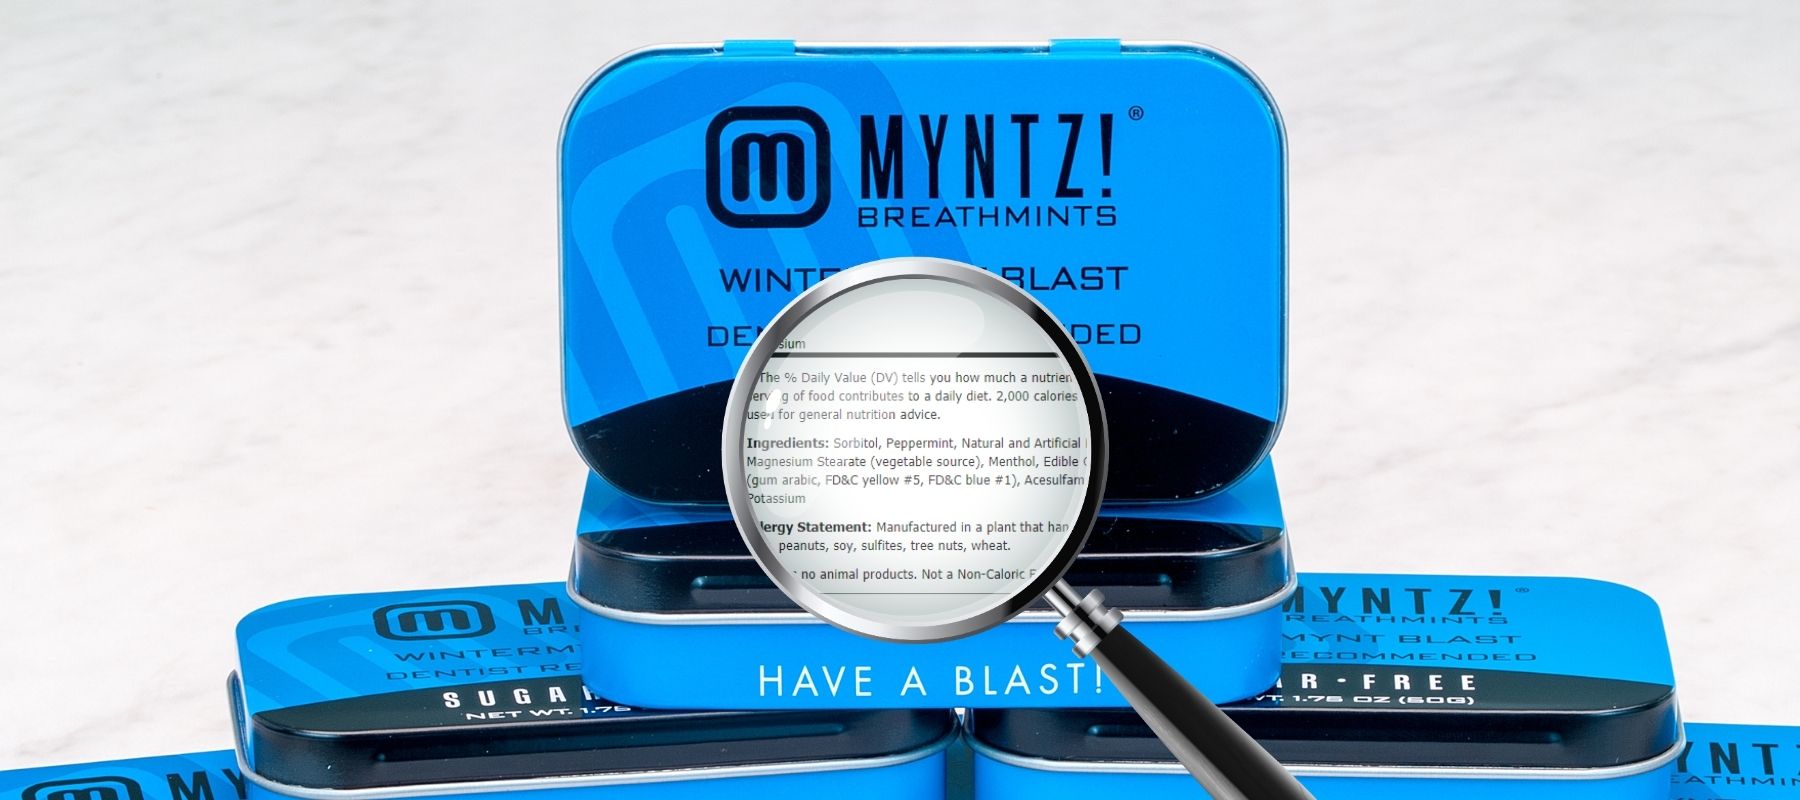 What is Inside a Mint?